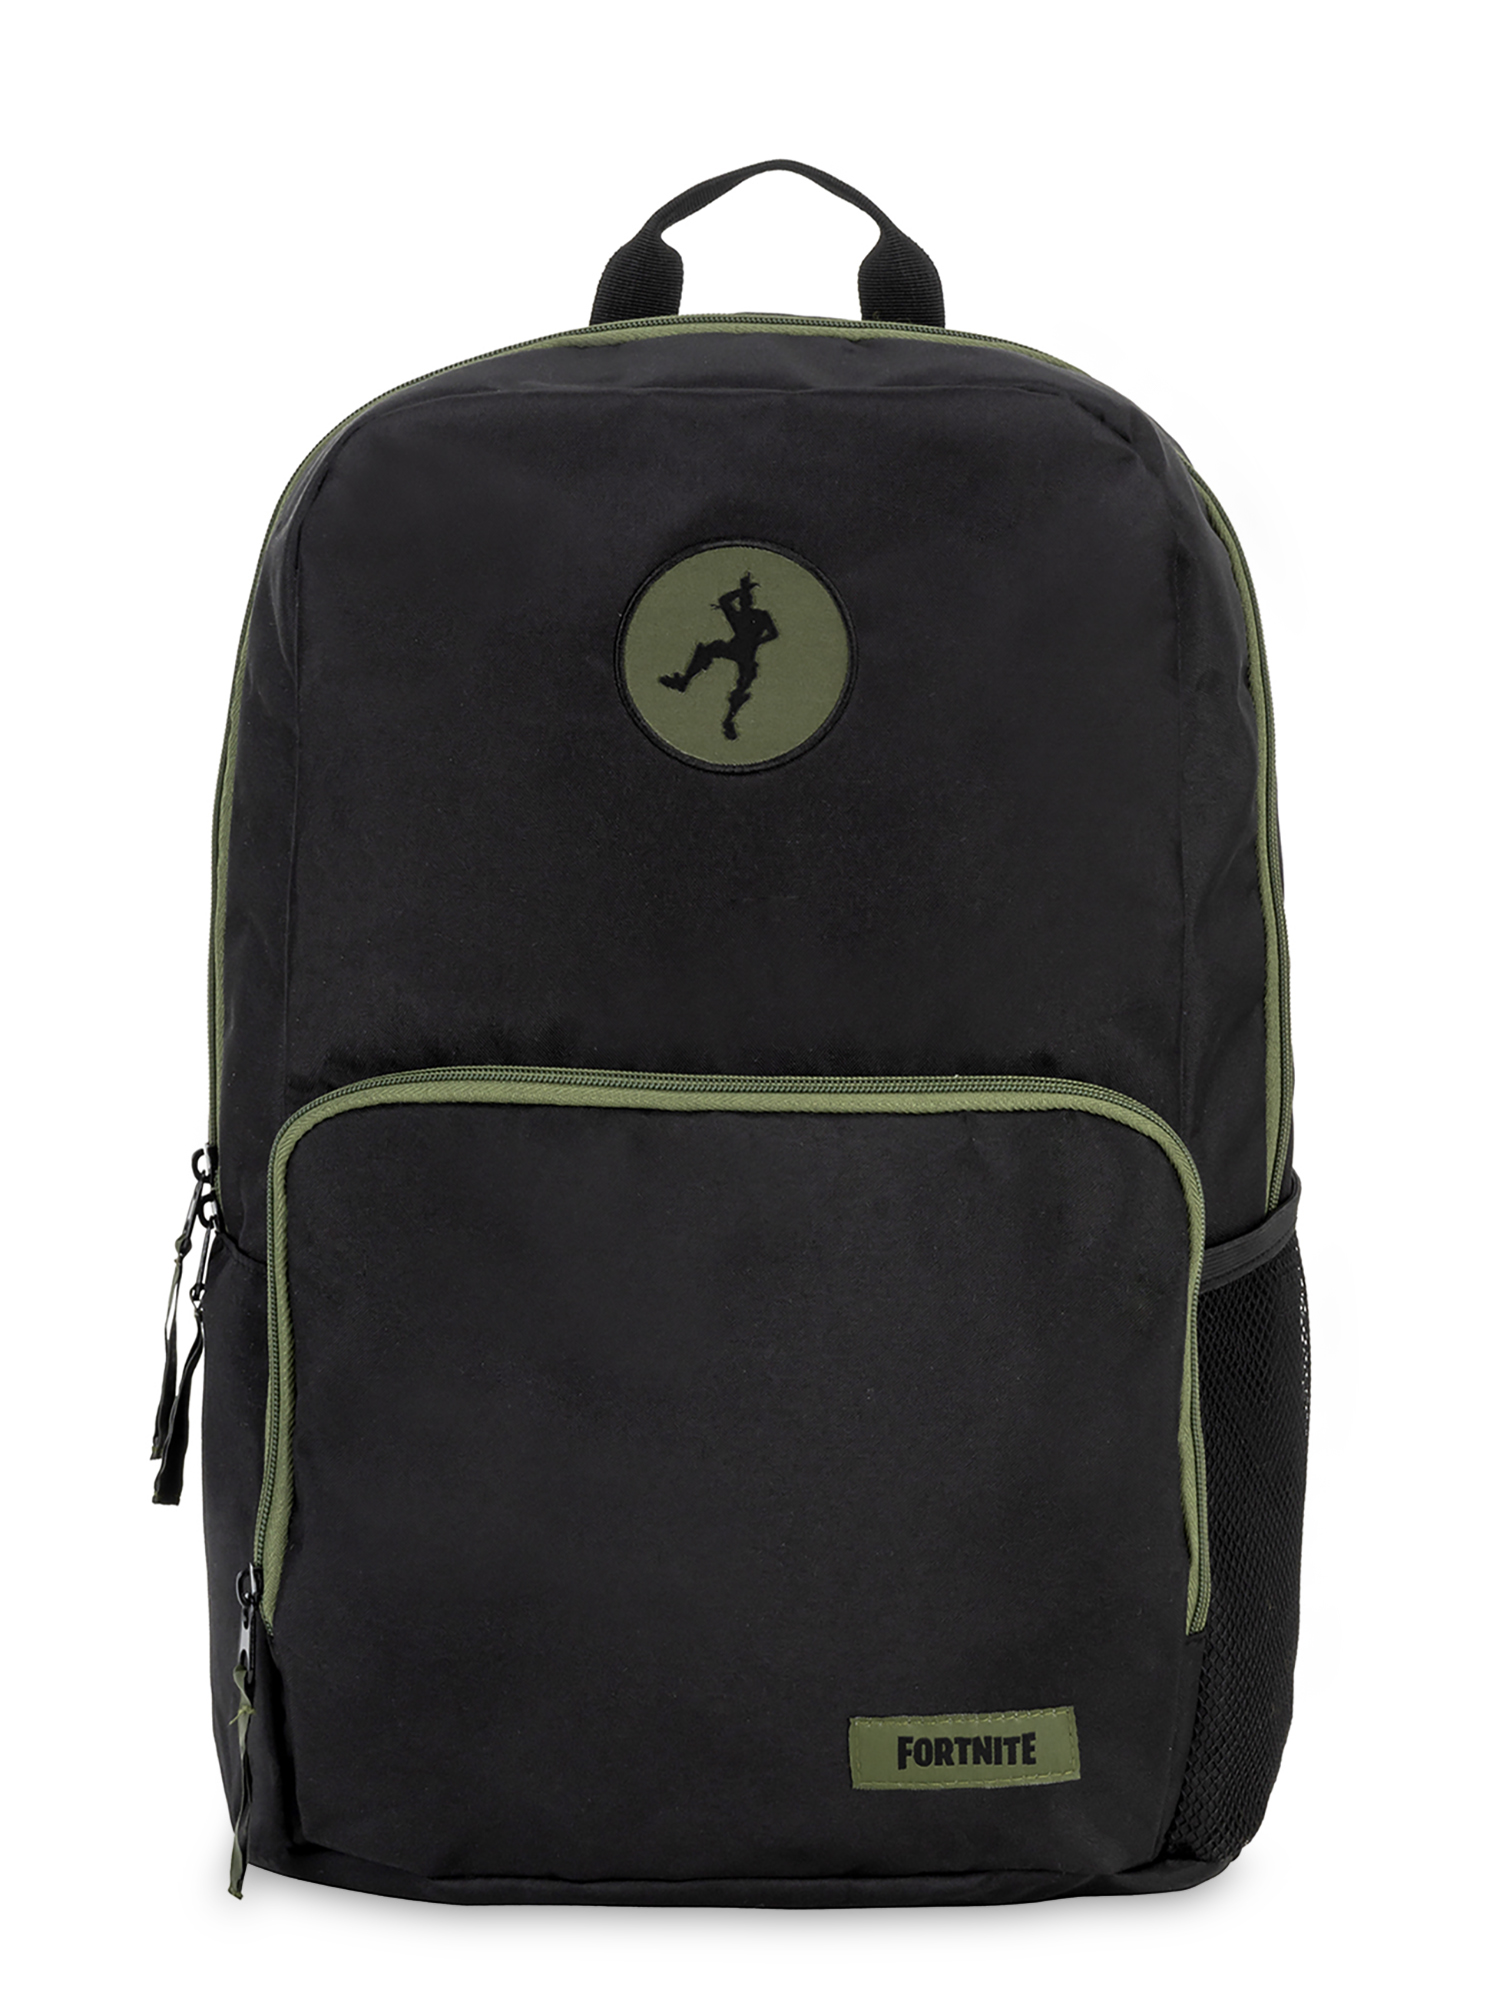 Fortnite Solidify Backpack - image 1 of 4